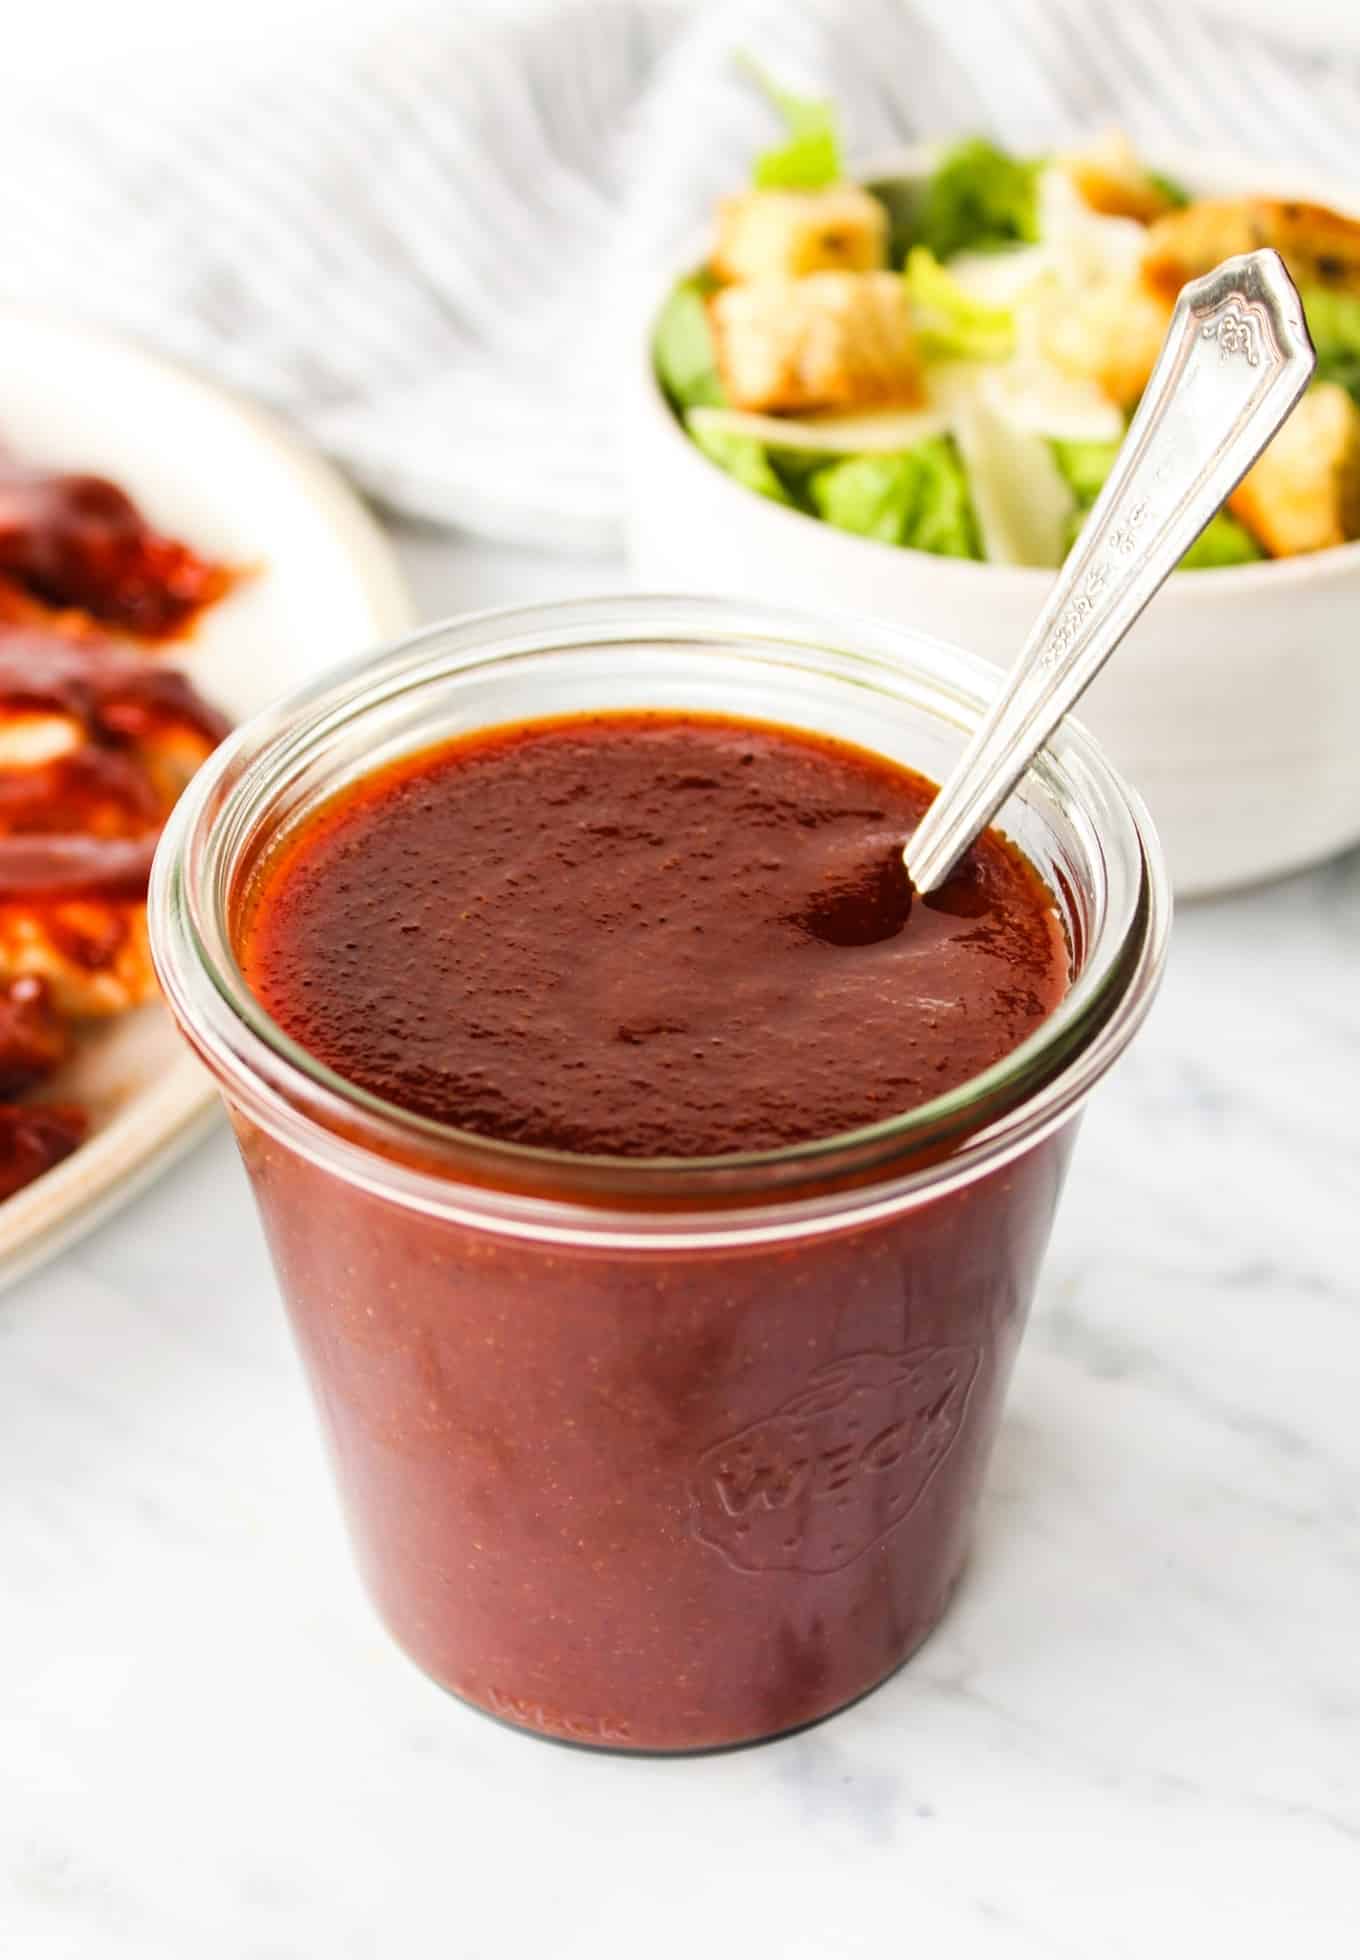 https://thewholecook.com/wp-content/uploads/2021/04/Homemade-Barbecue-Sauce-by-The-Whole-Cook-vertical.jpg